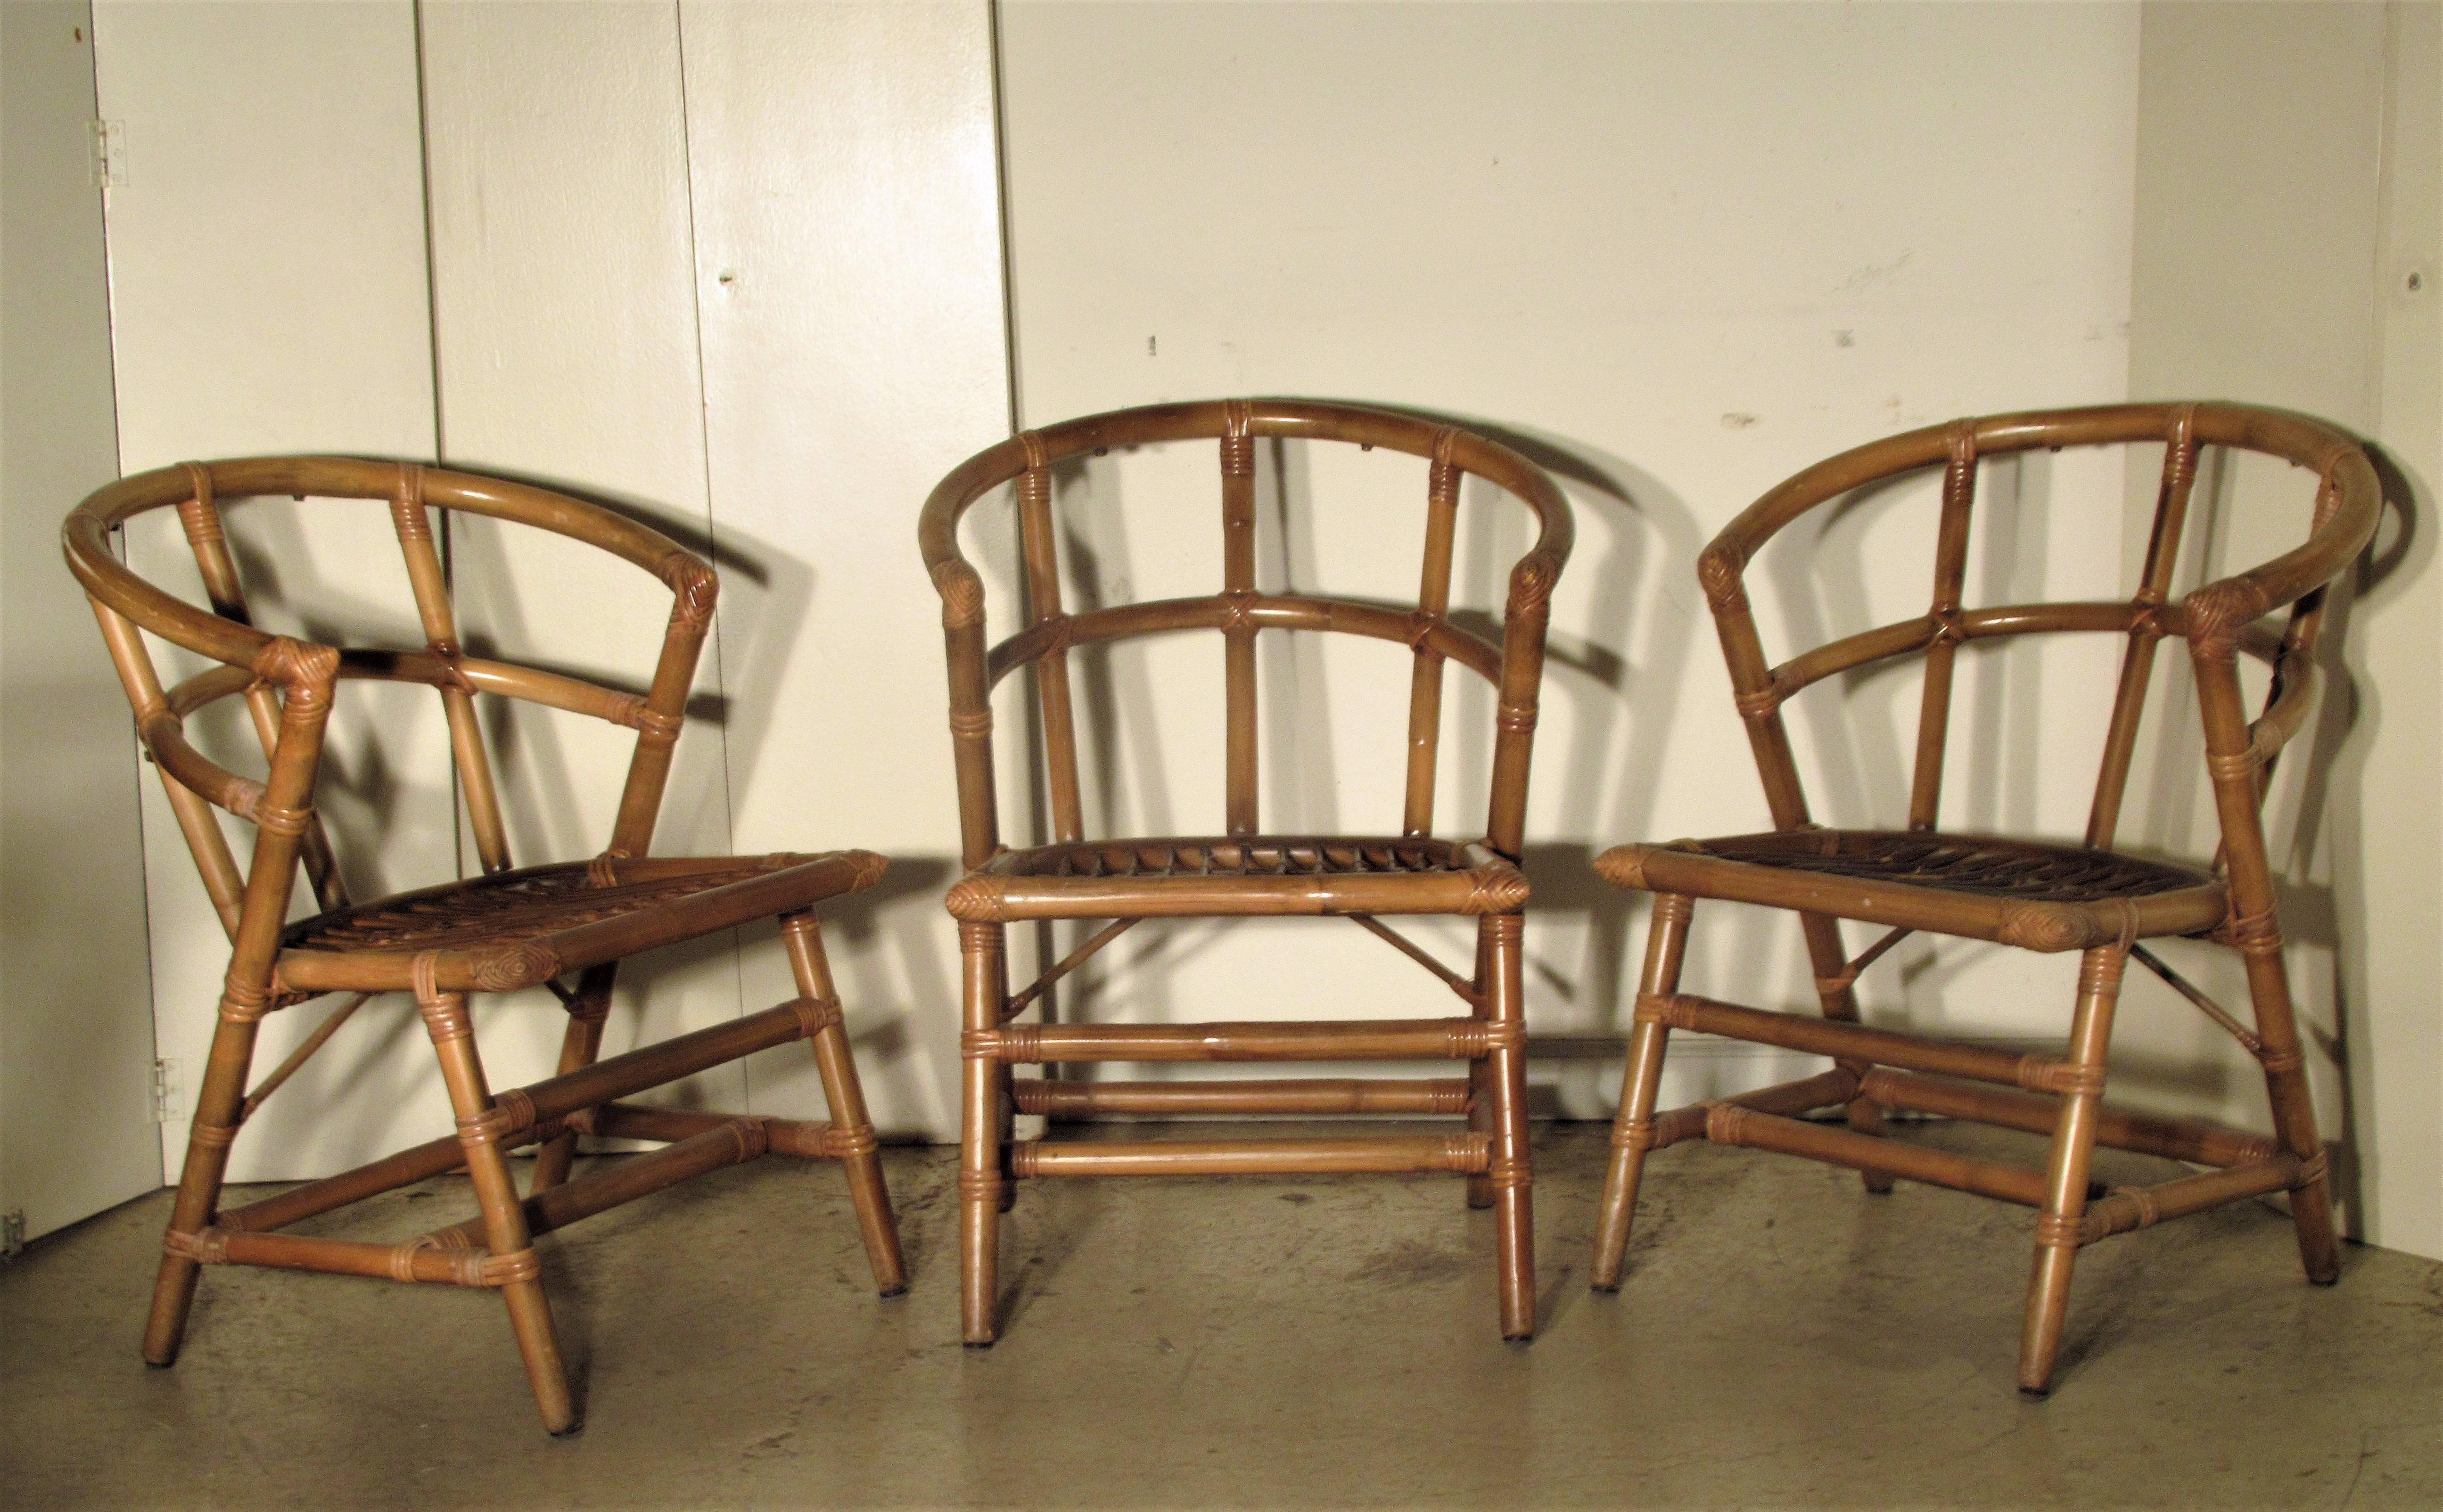 A hard to find set of six matching natural rattan side or dining chairs by Willow and Reed often attributed to Tommi Parzinger. All chairs in great glowing original rich honey colored surface/structurally solid strong/no breaks or losses, circa